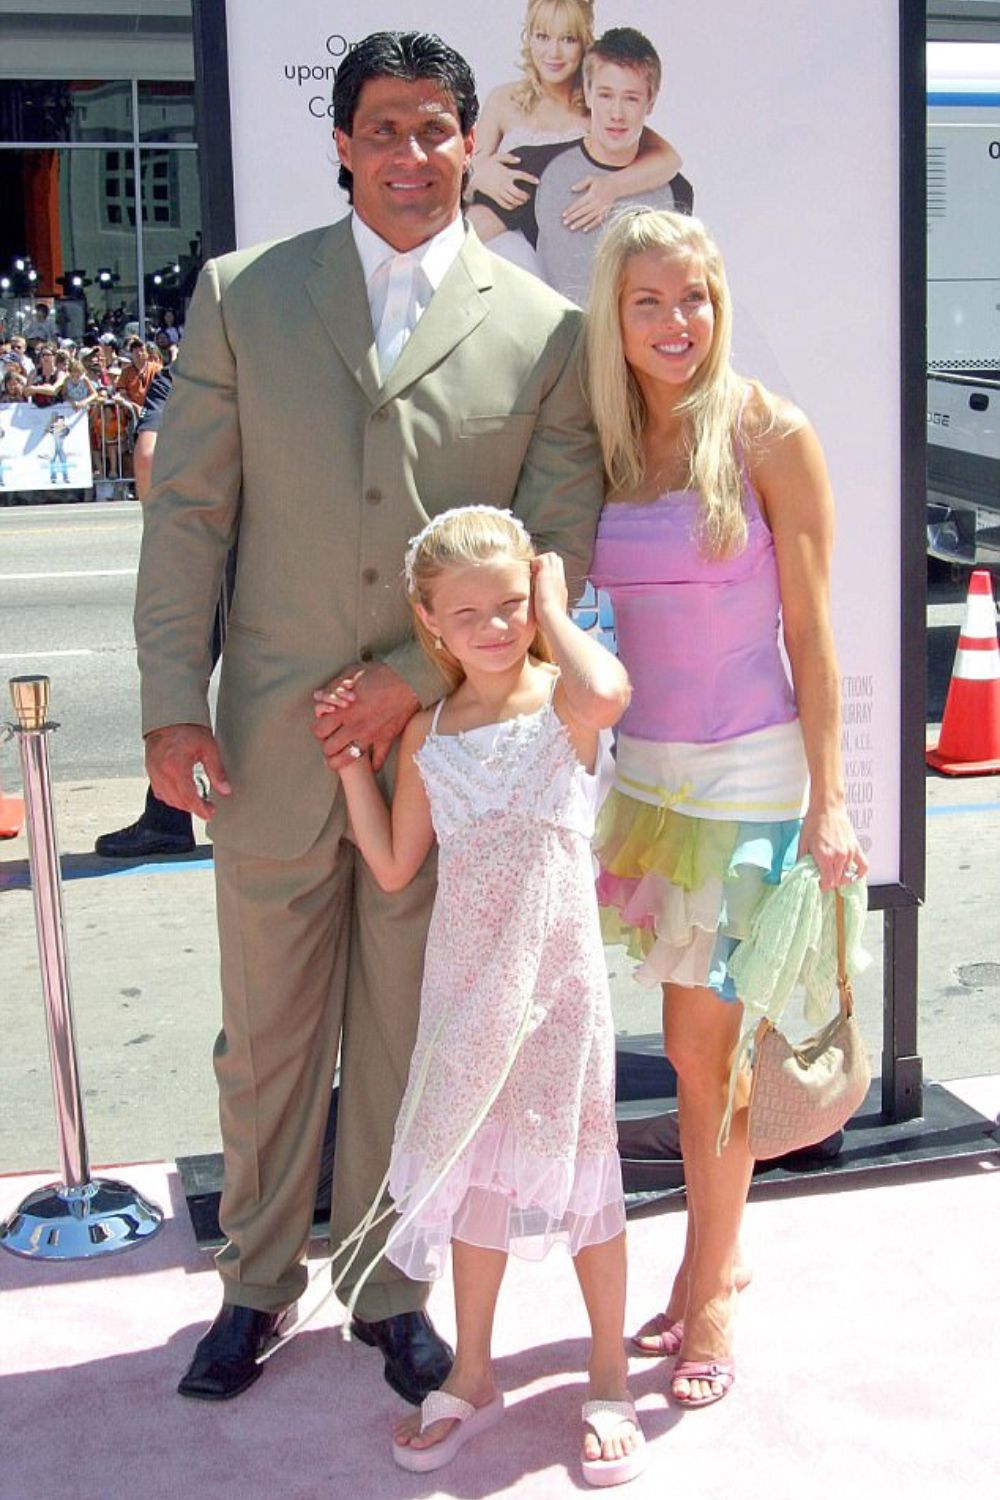 Josie Canseco With Father Jose And Mother Jessica